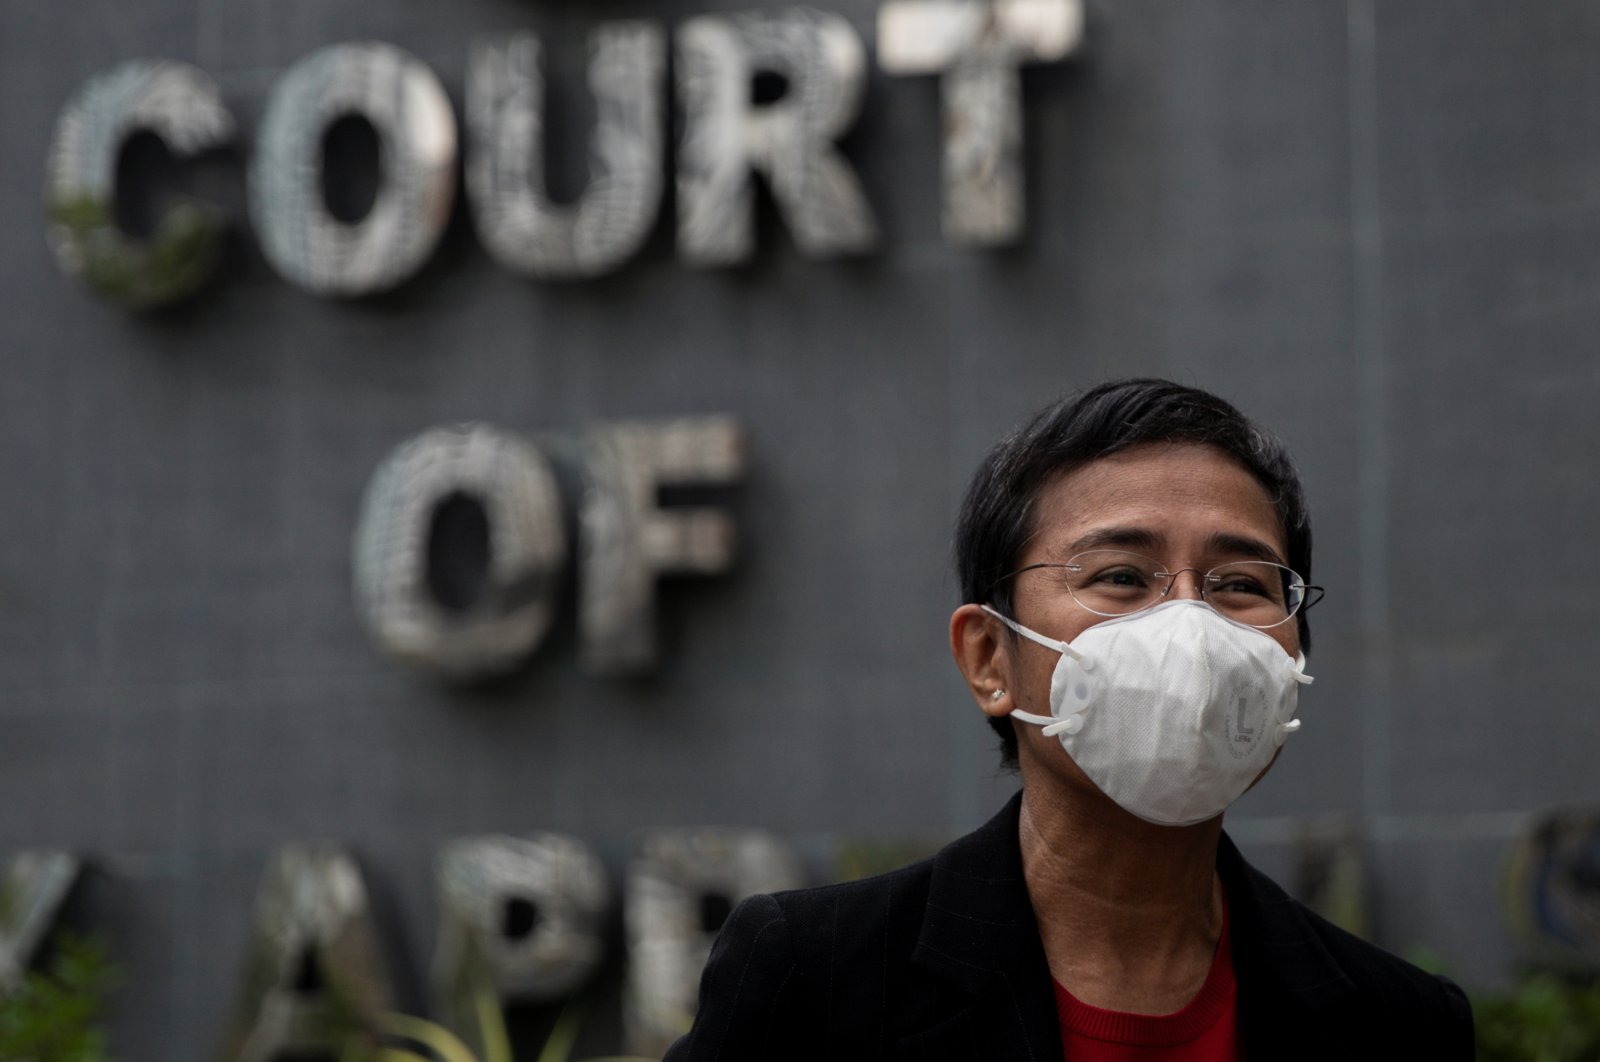 Filipino journalist and Rappler CEO Maria Ressa speaks to the media after testifying before the Court of Tax Appeals in Quezon City, Metro Manila, Philippines, March 4, 2021. (Reuters Photo)